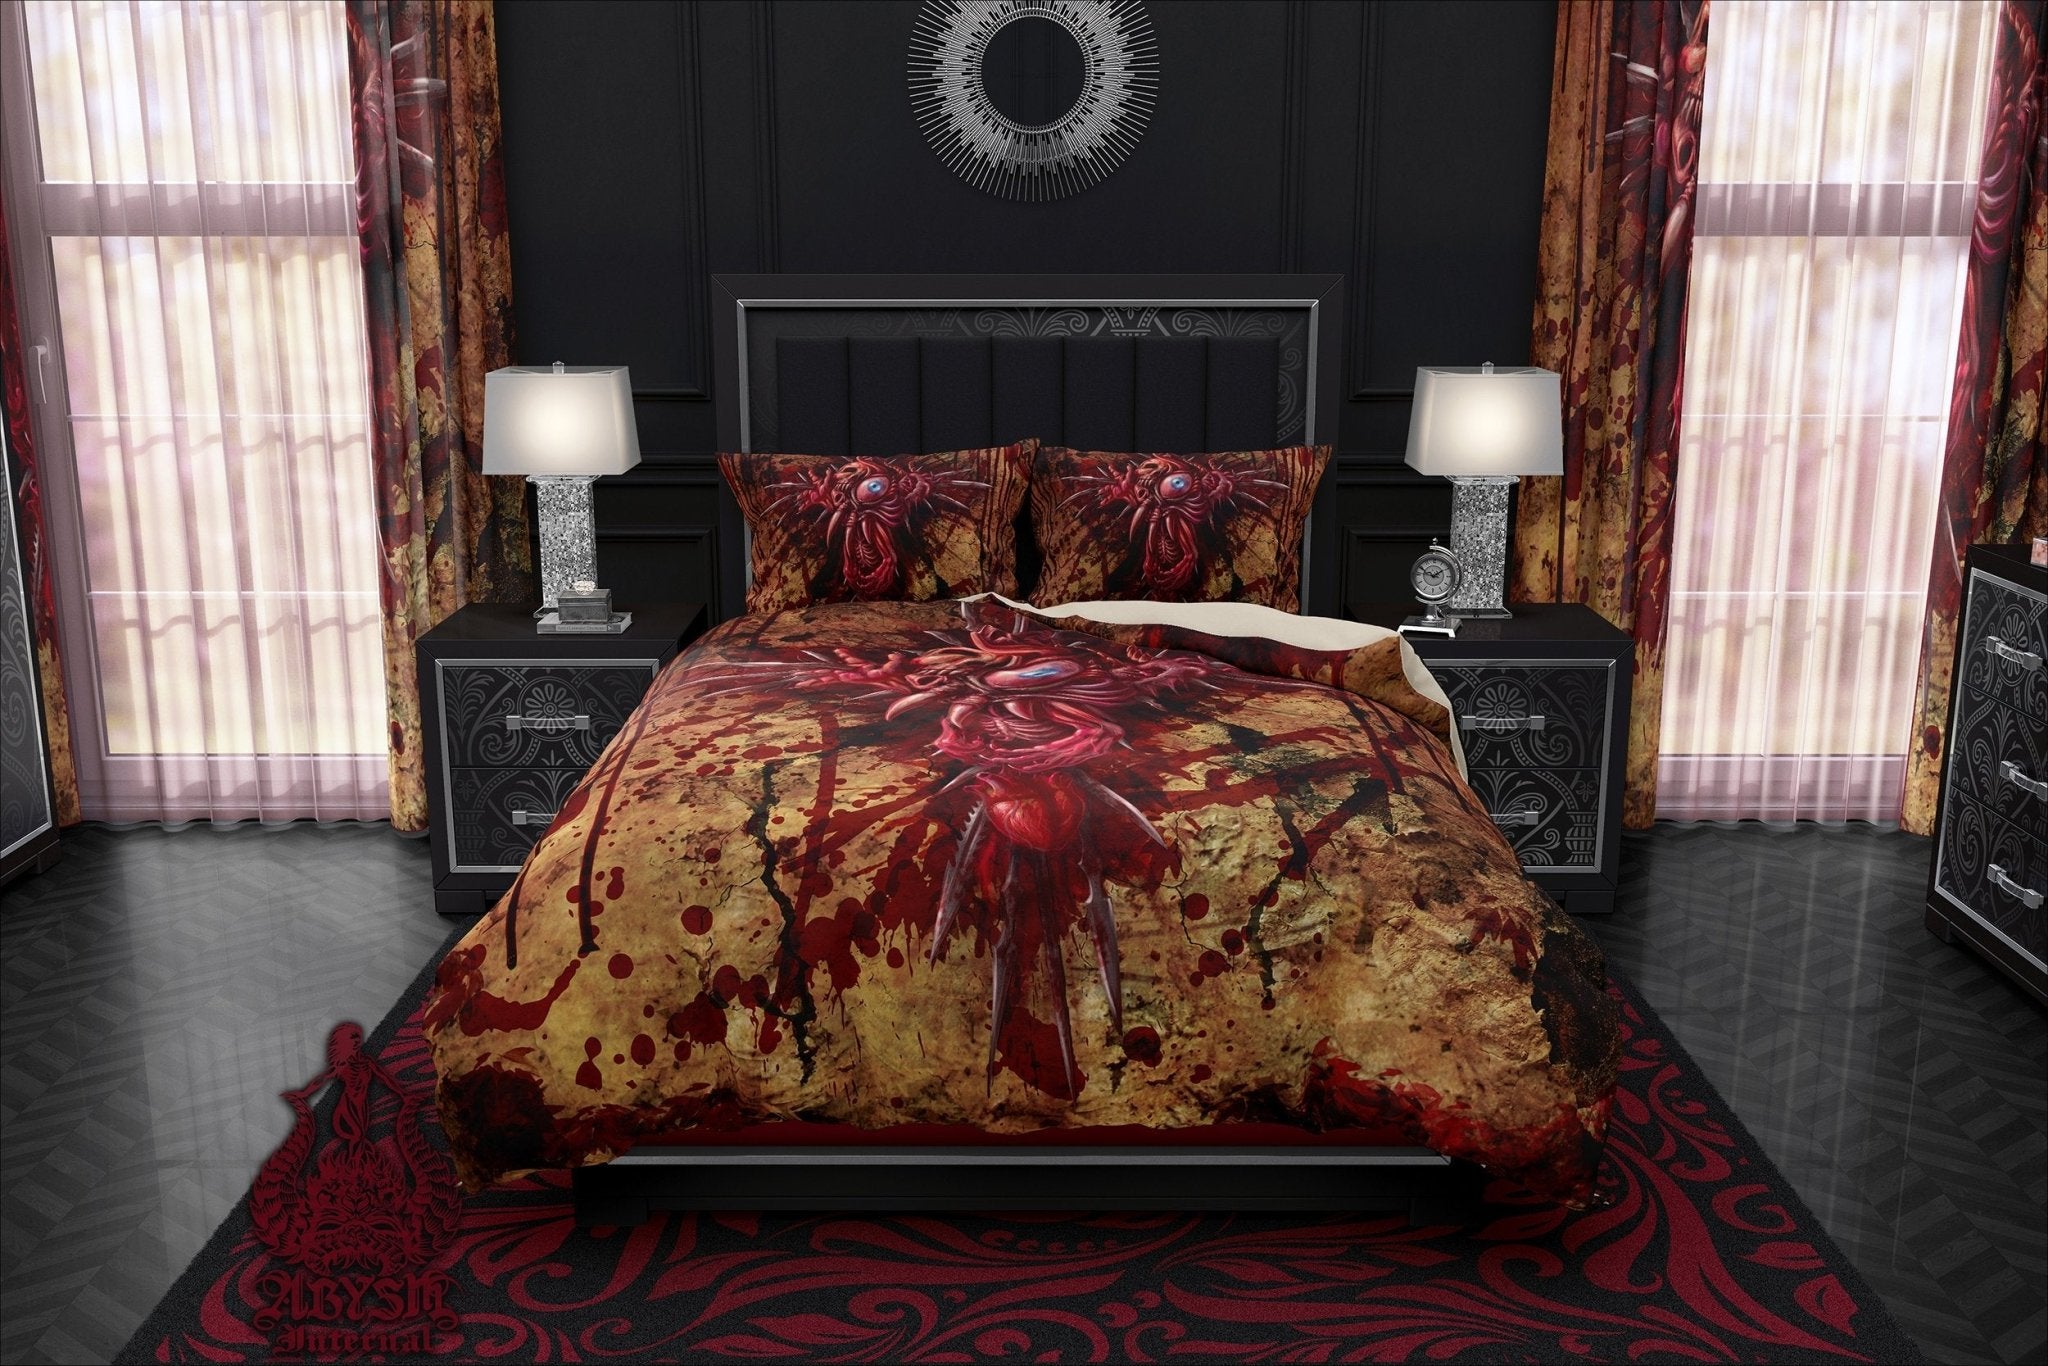 Horror Bedding Set, Comforter and Duvet, Halloween Bed Cover and Bedroom Decor, King, Queen and Twin Size - Gore Cross, Dark Grunge - Abysm Internal